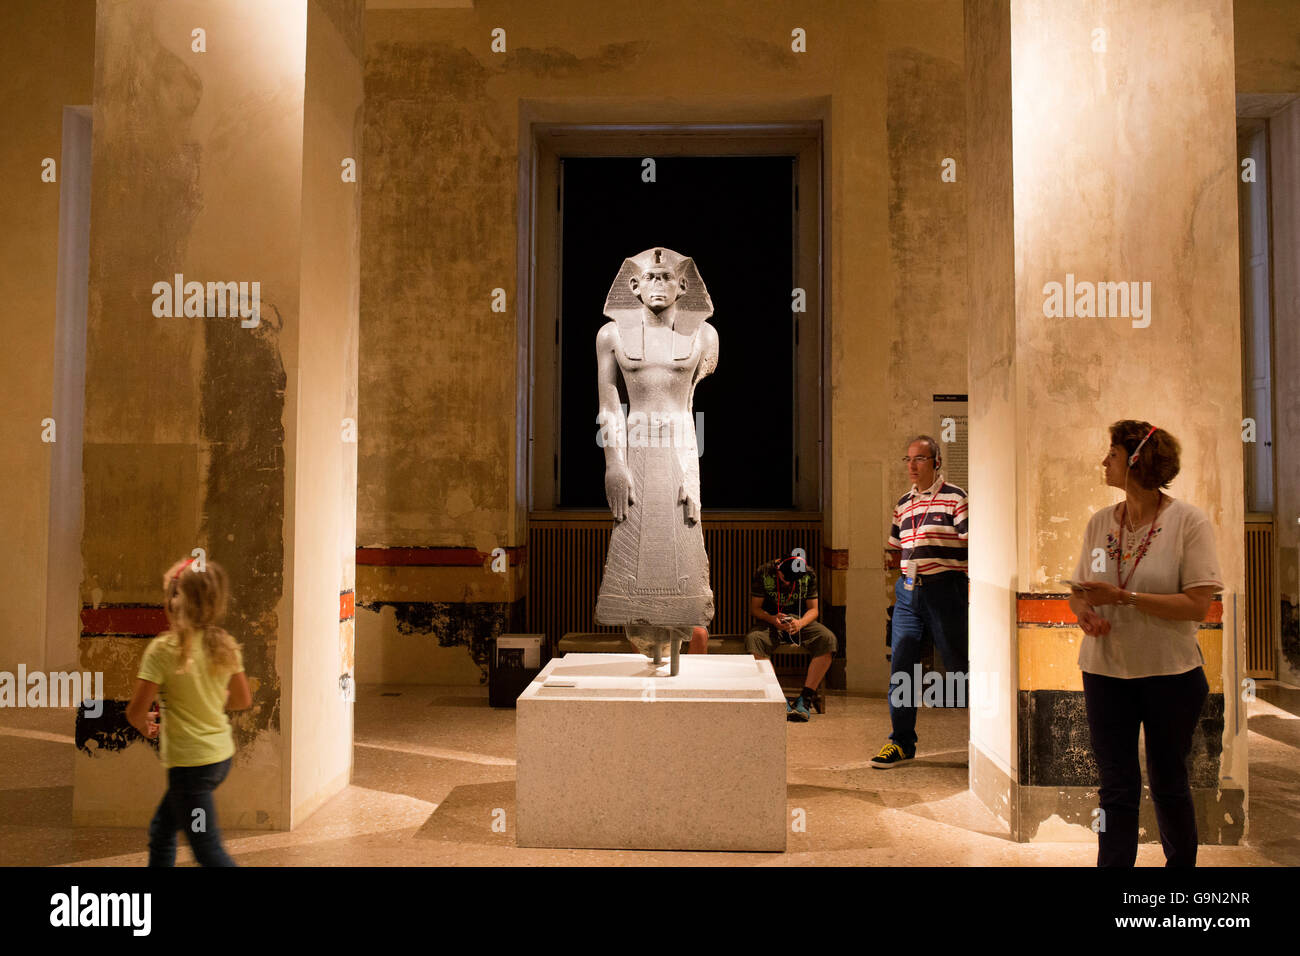 Sculpture of Pharaoh in a Neues Museum which is located in Museum Island. Stock Photo